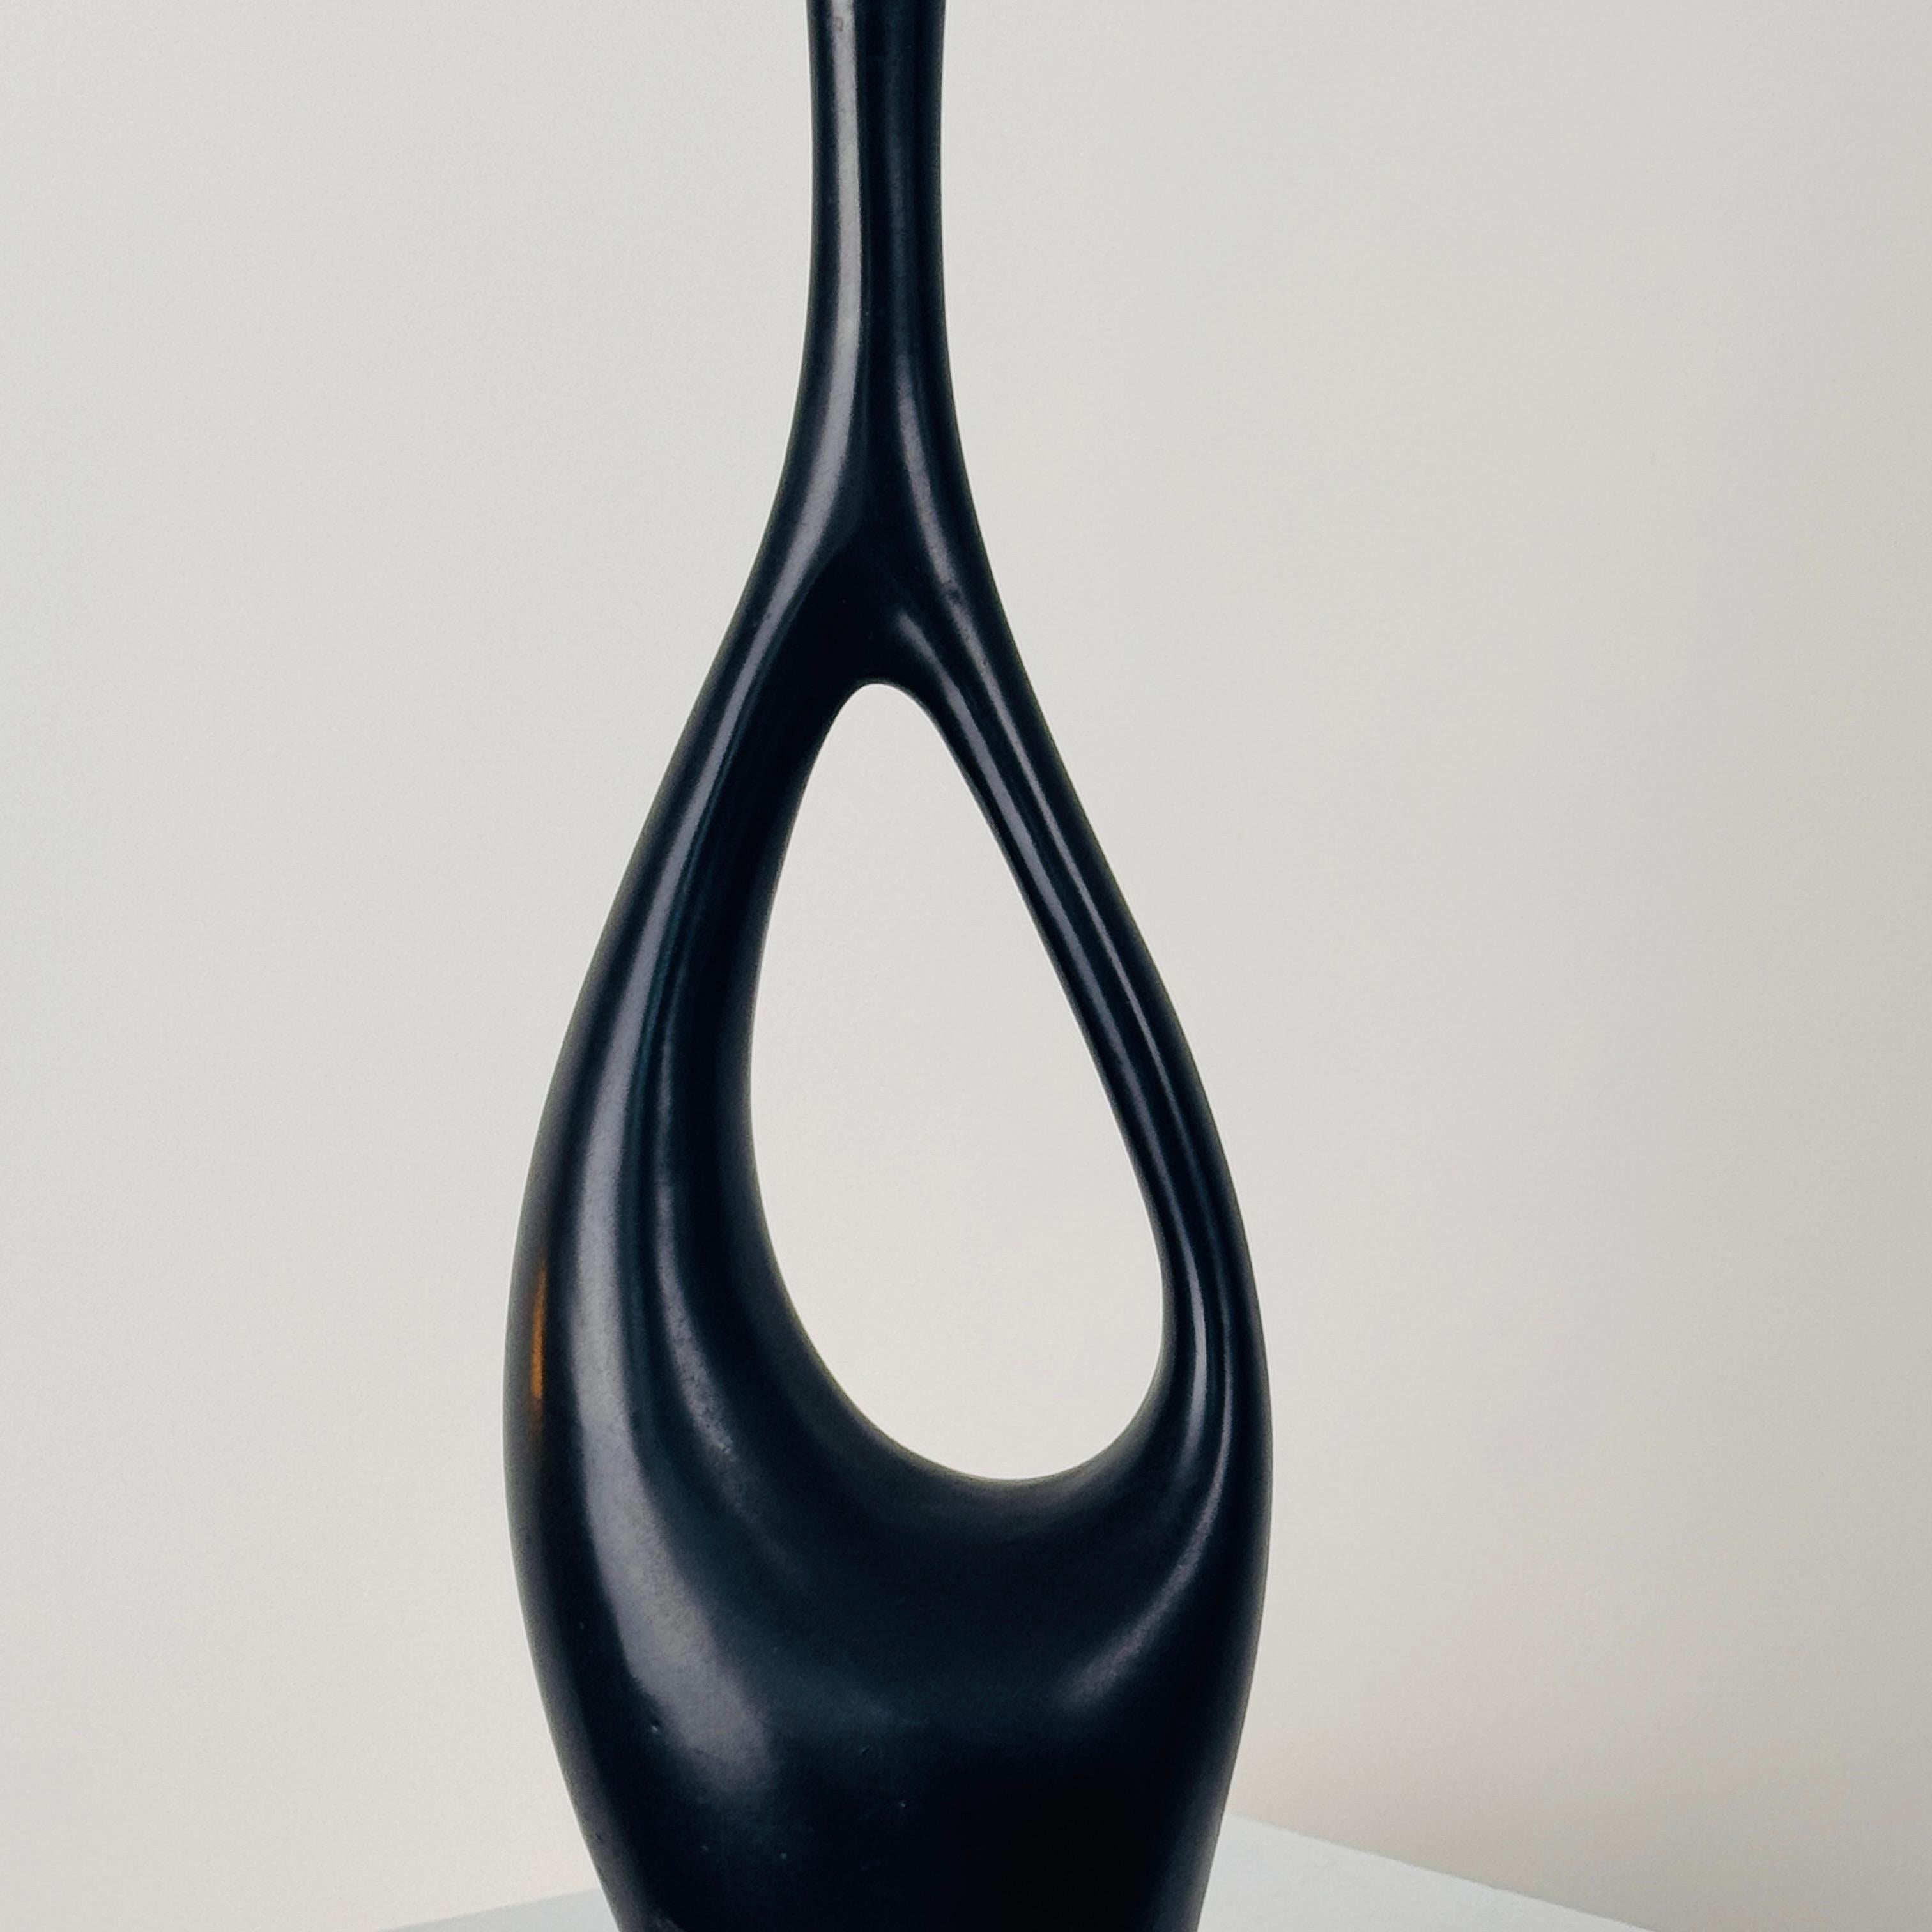 Large soliflore vase with black ceramic handle by Jean André Doucin, circa 1950. 1